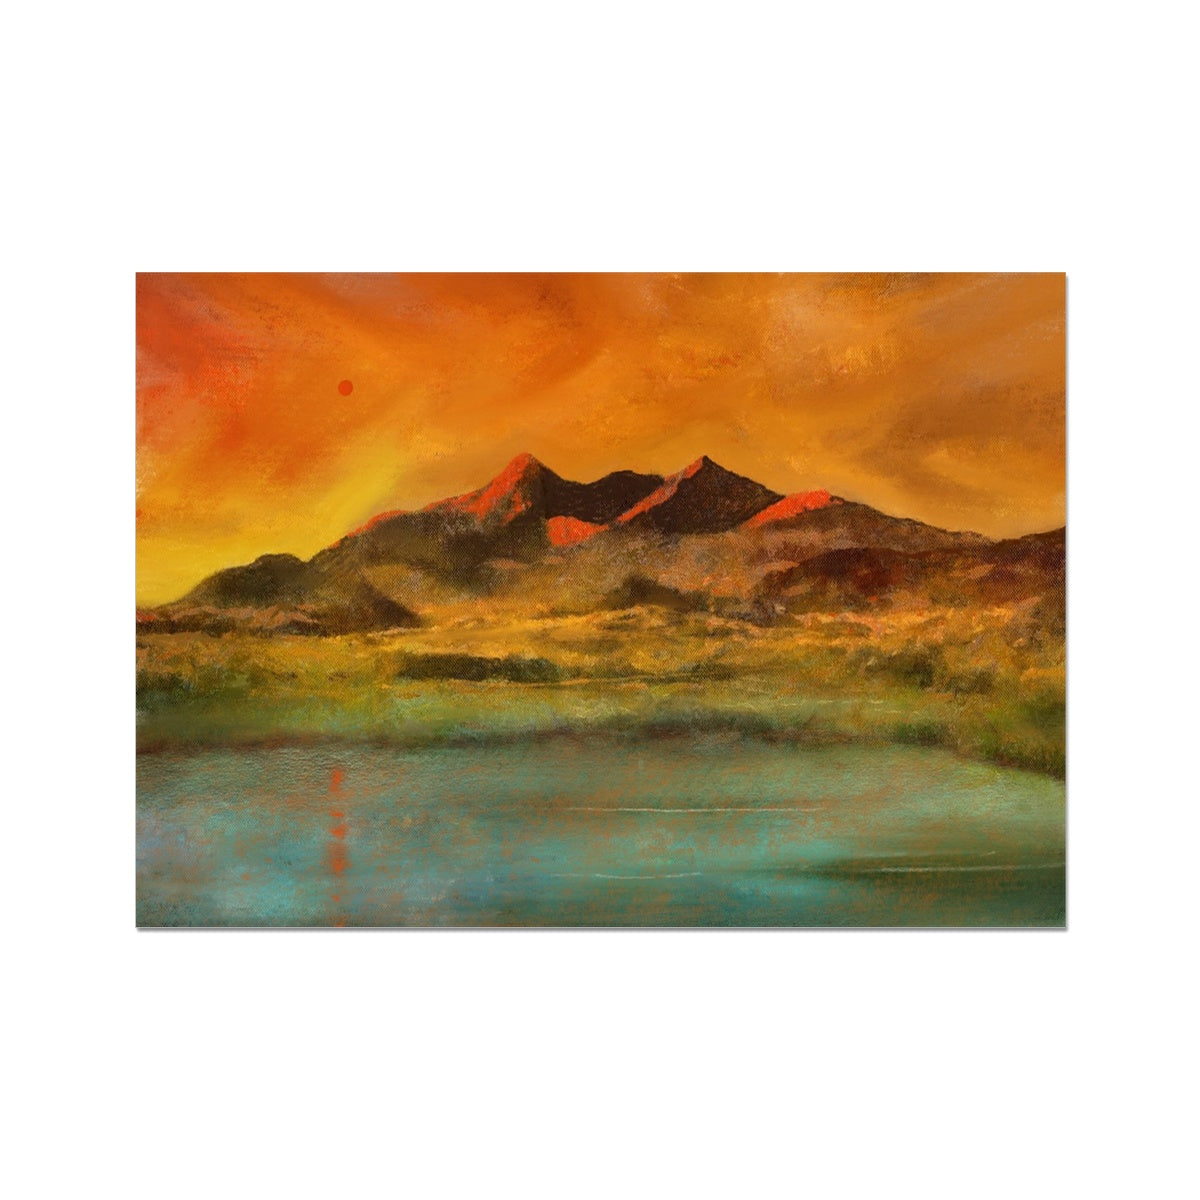 Skye Red Moon Cuilling Painting | Fine Art Prints From Scotland-Unframed Prints-Skye Art Gallery-A2 Landscape-Paintings, Prints, Homeware, Art Gifts From Scotland By Scottish Artist Kevin Hunter